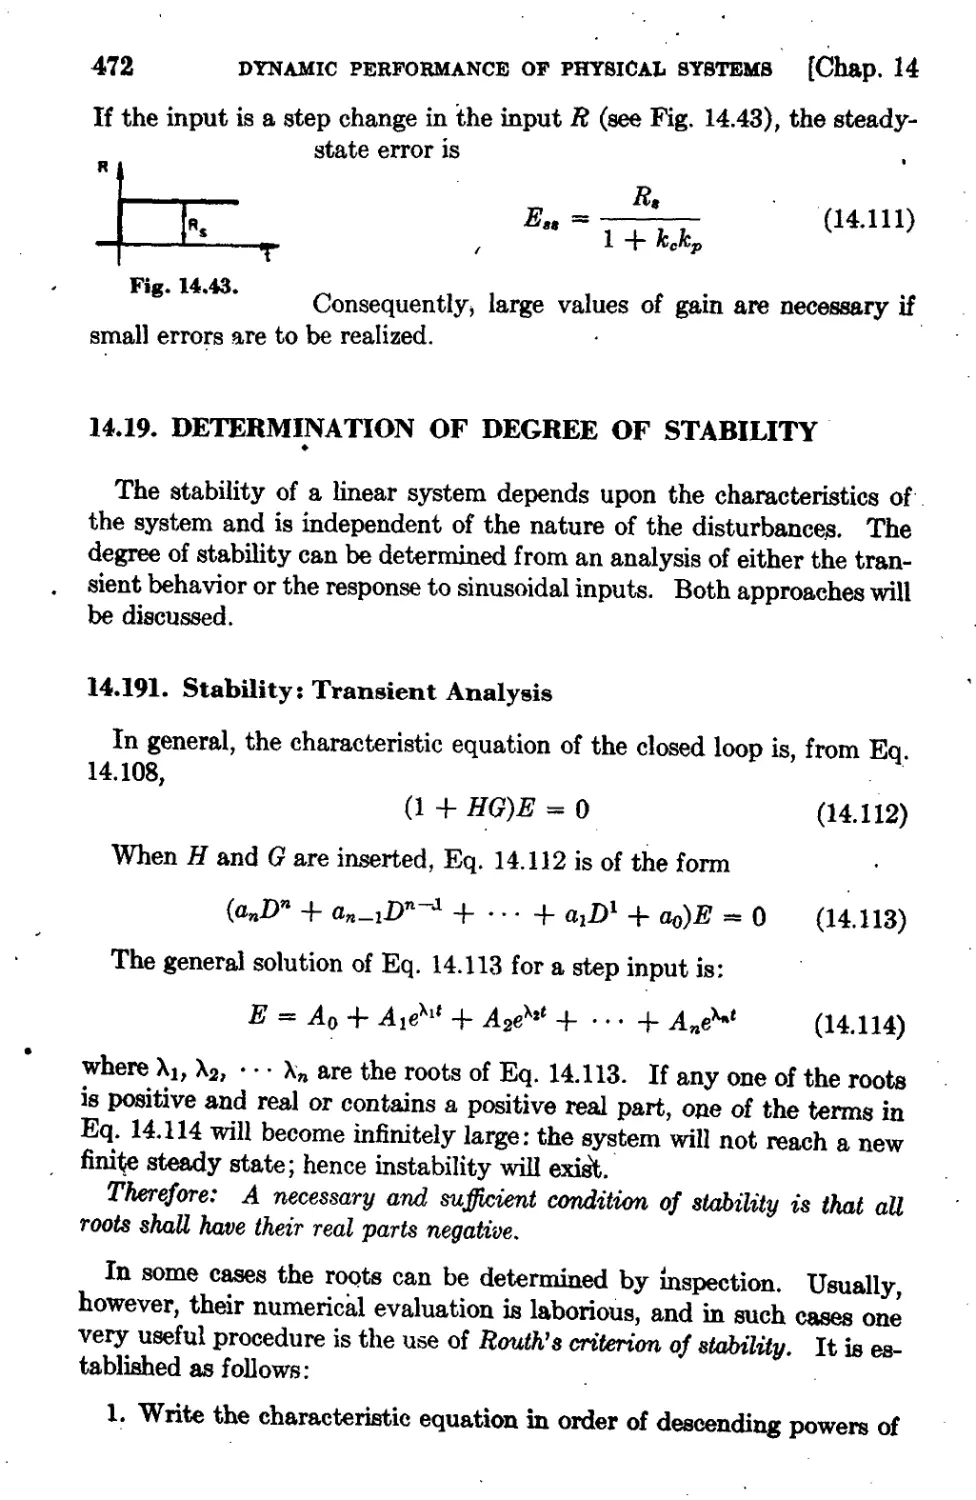 14.19 Determination of Degree of Stability